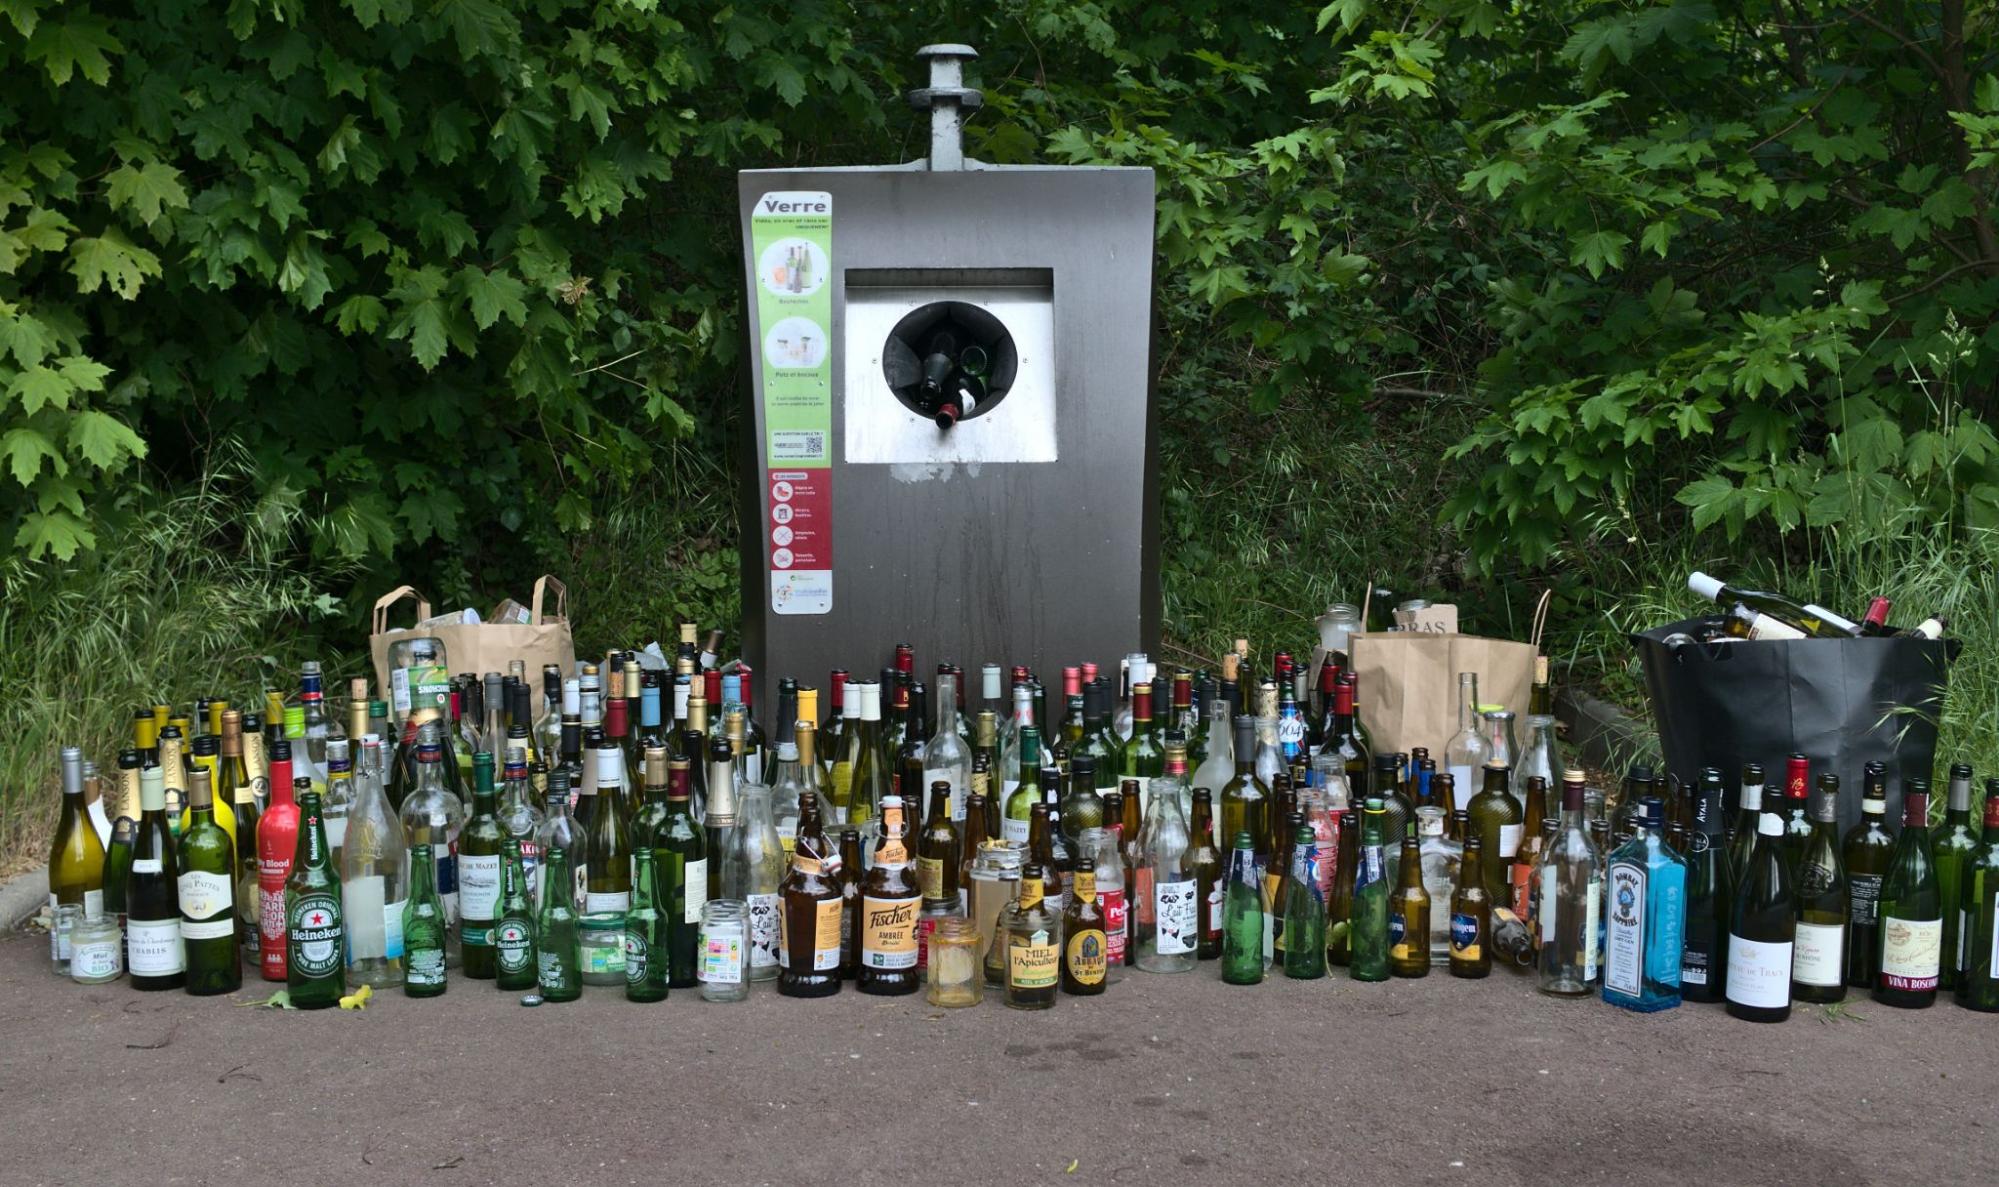 an enormous collection of wine bottles, beer bottles, cans, water bottles and other beverage containers in front of a recycling bottle deposit box.